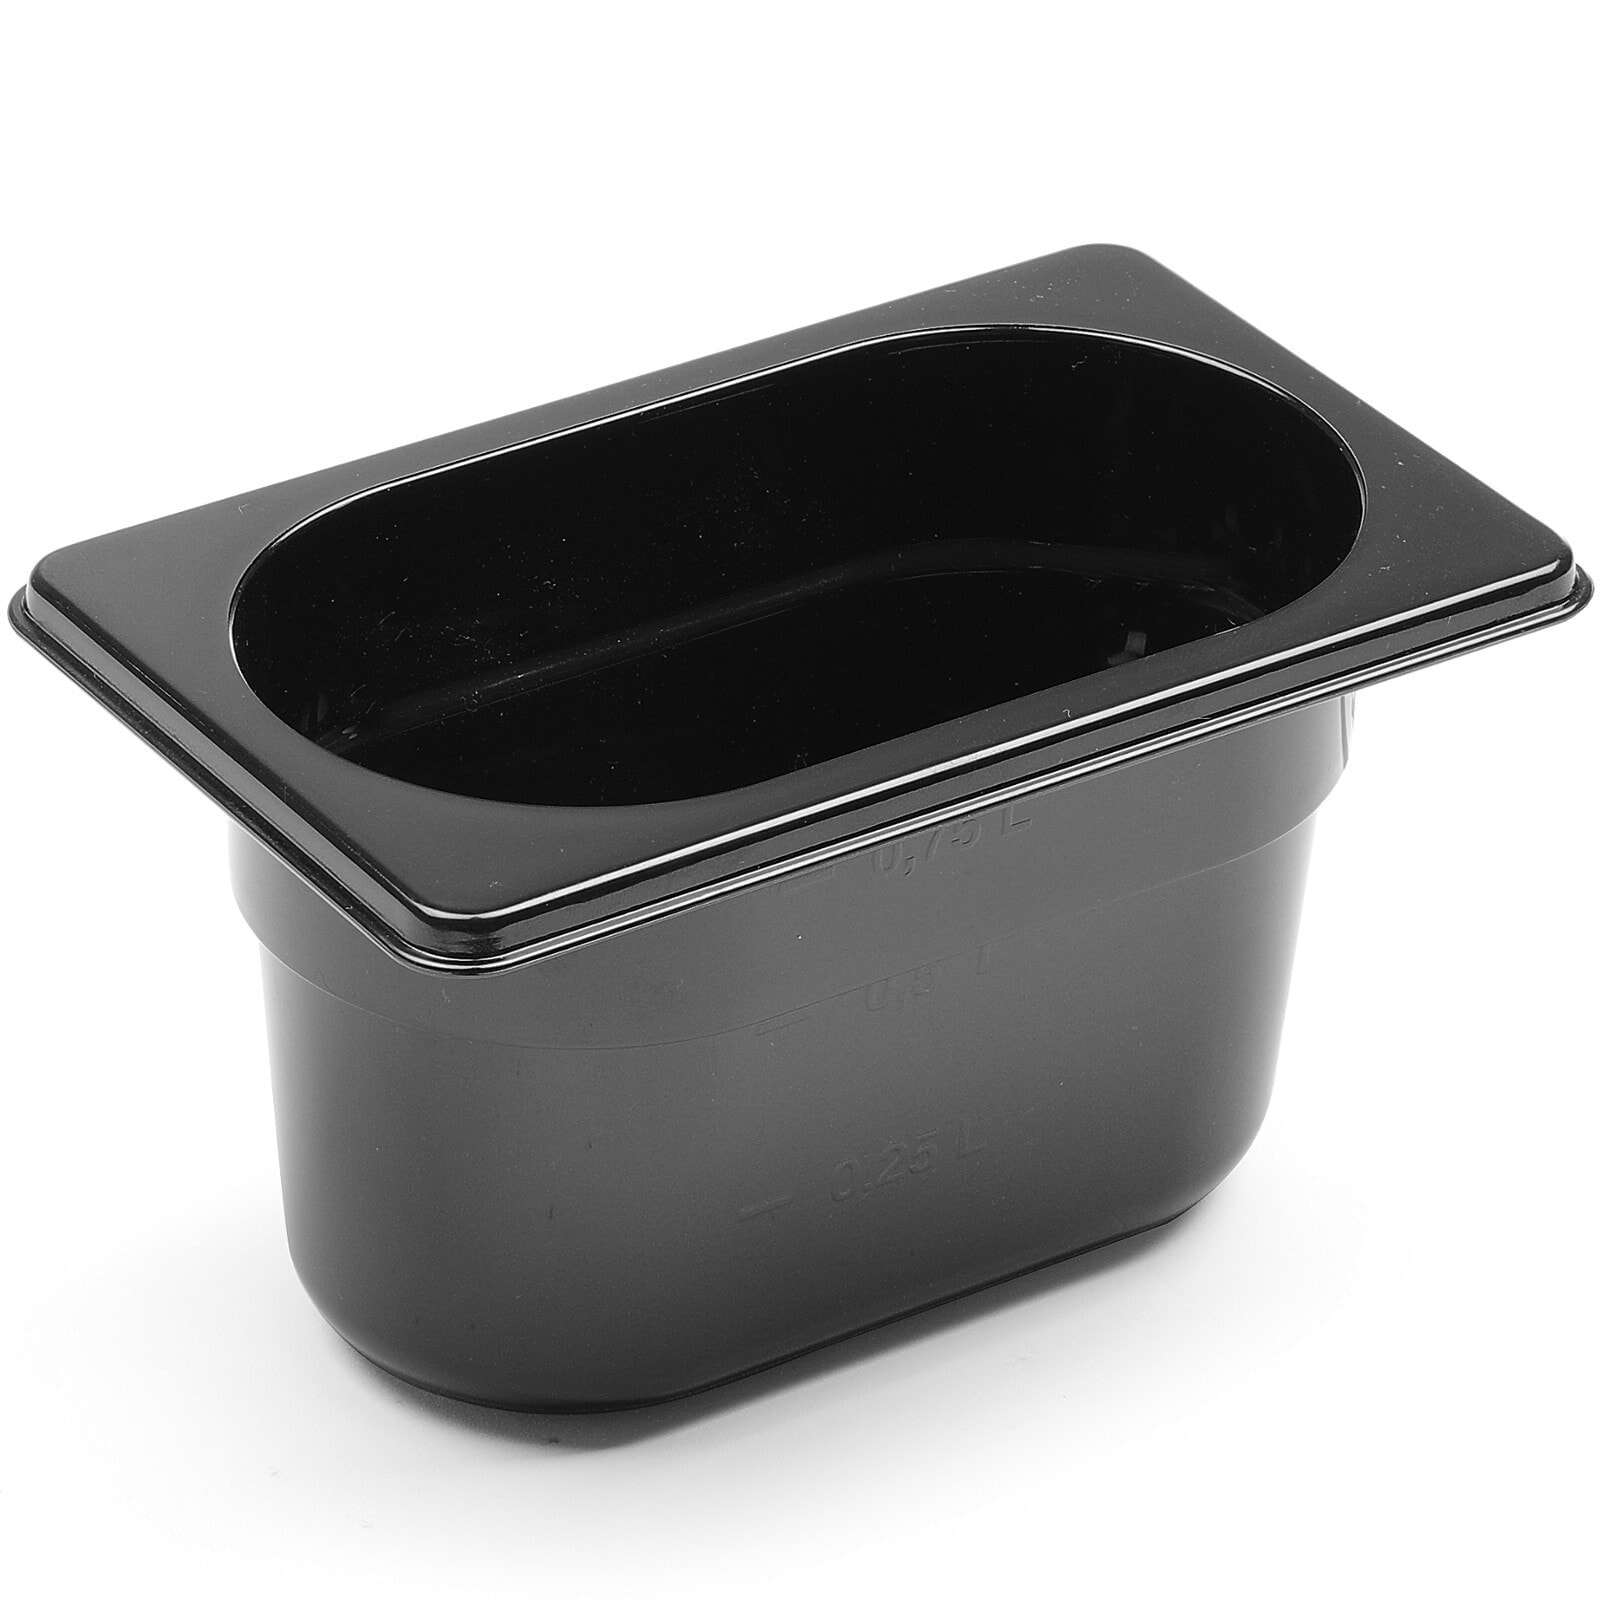 Gastronomy container GN 1/9 made of black polycarbonate 176x162x100mm 1L Hendi 862827